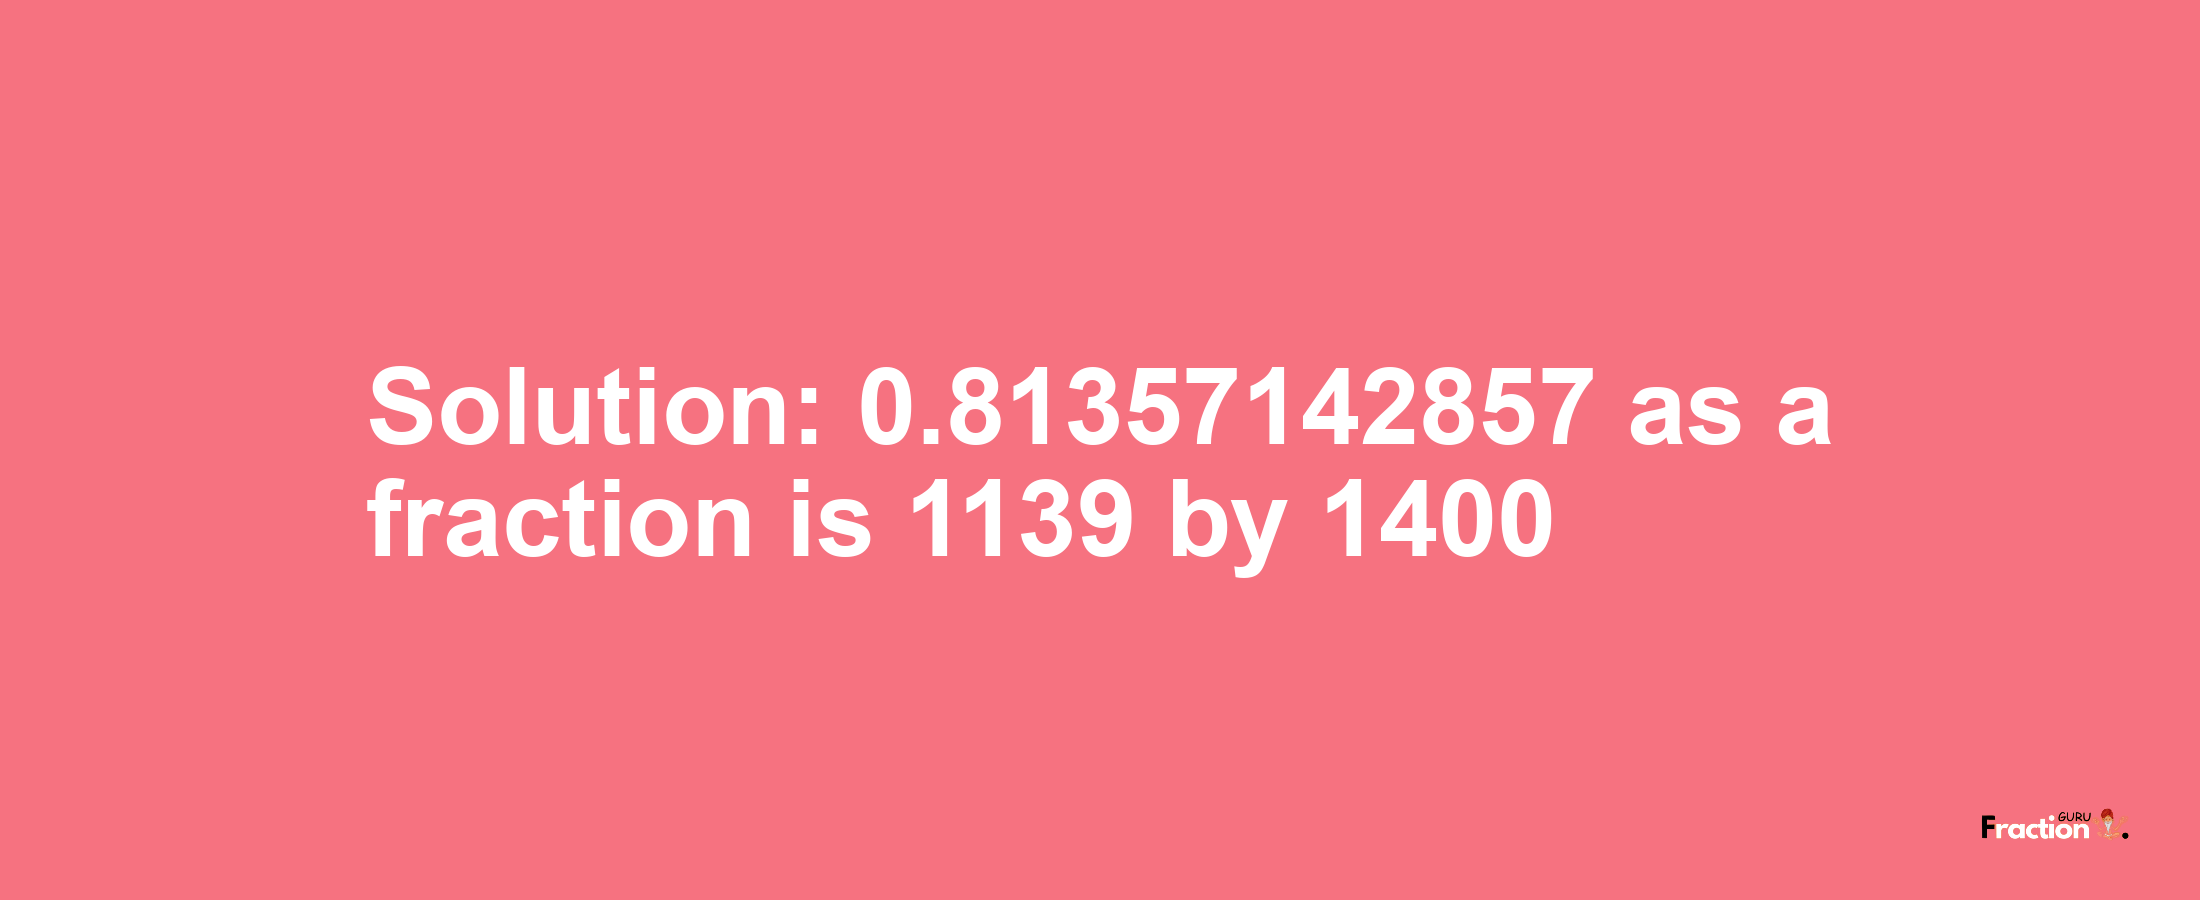 Solution:0.81357142857 as a fraction is 1139/1400